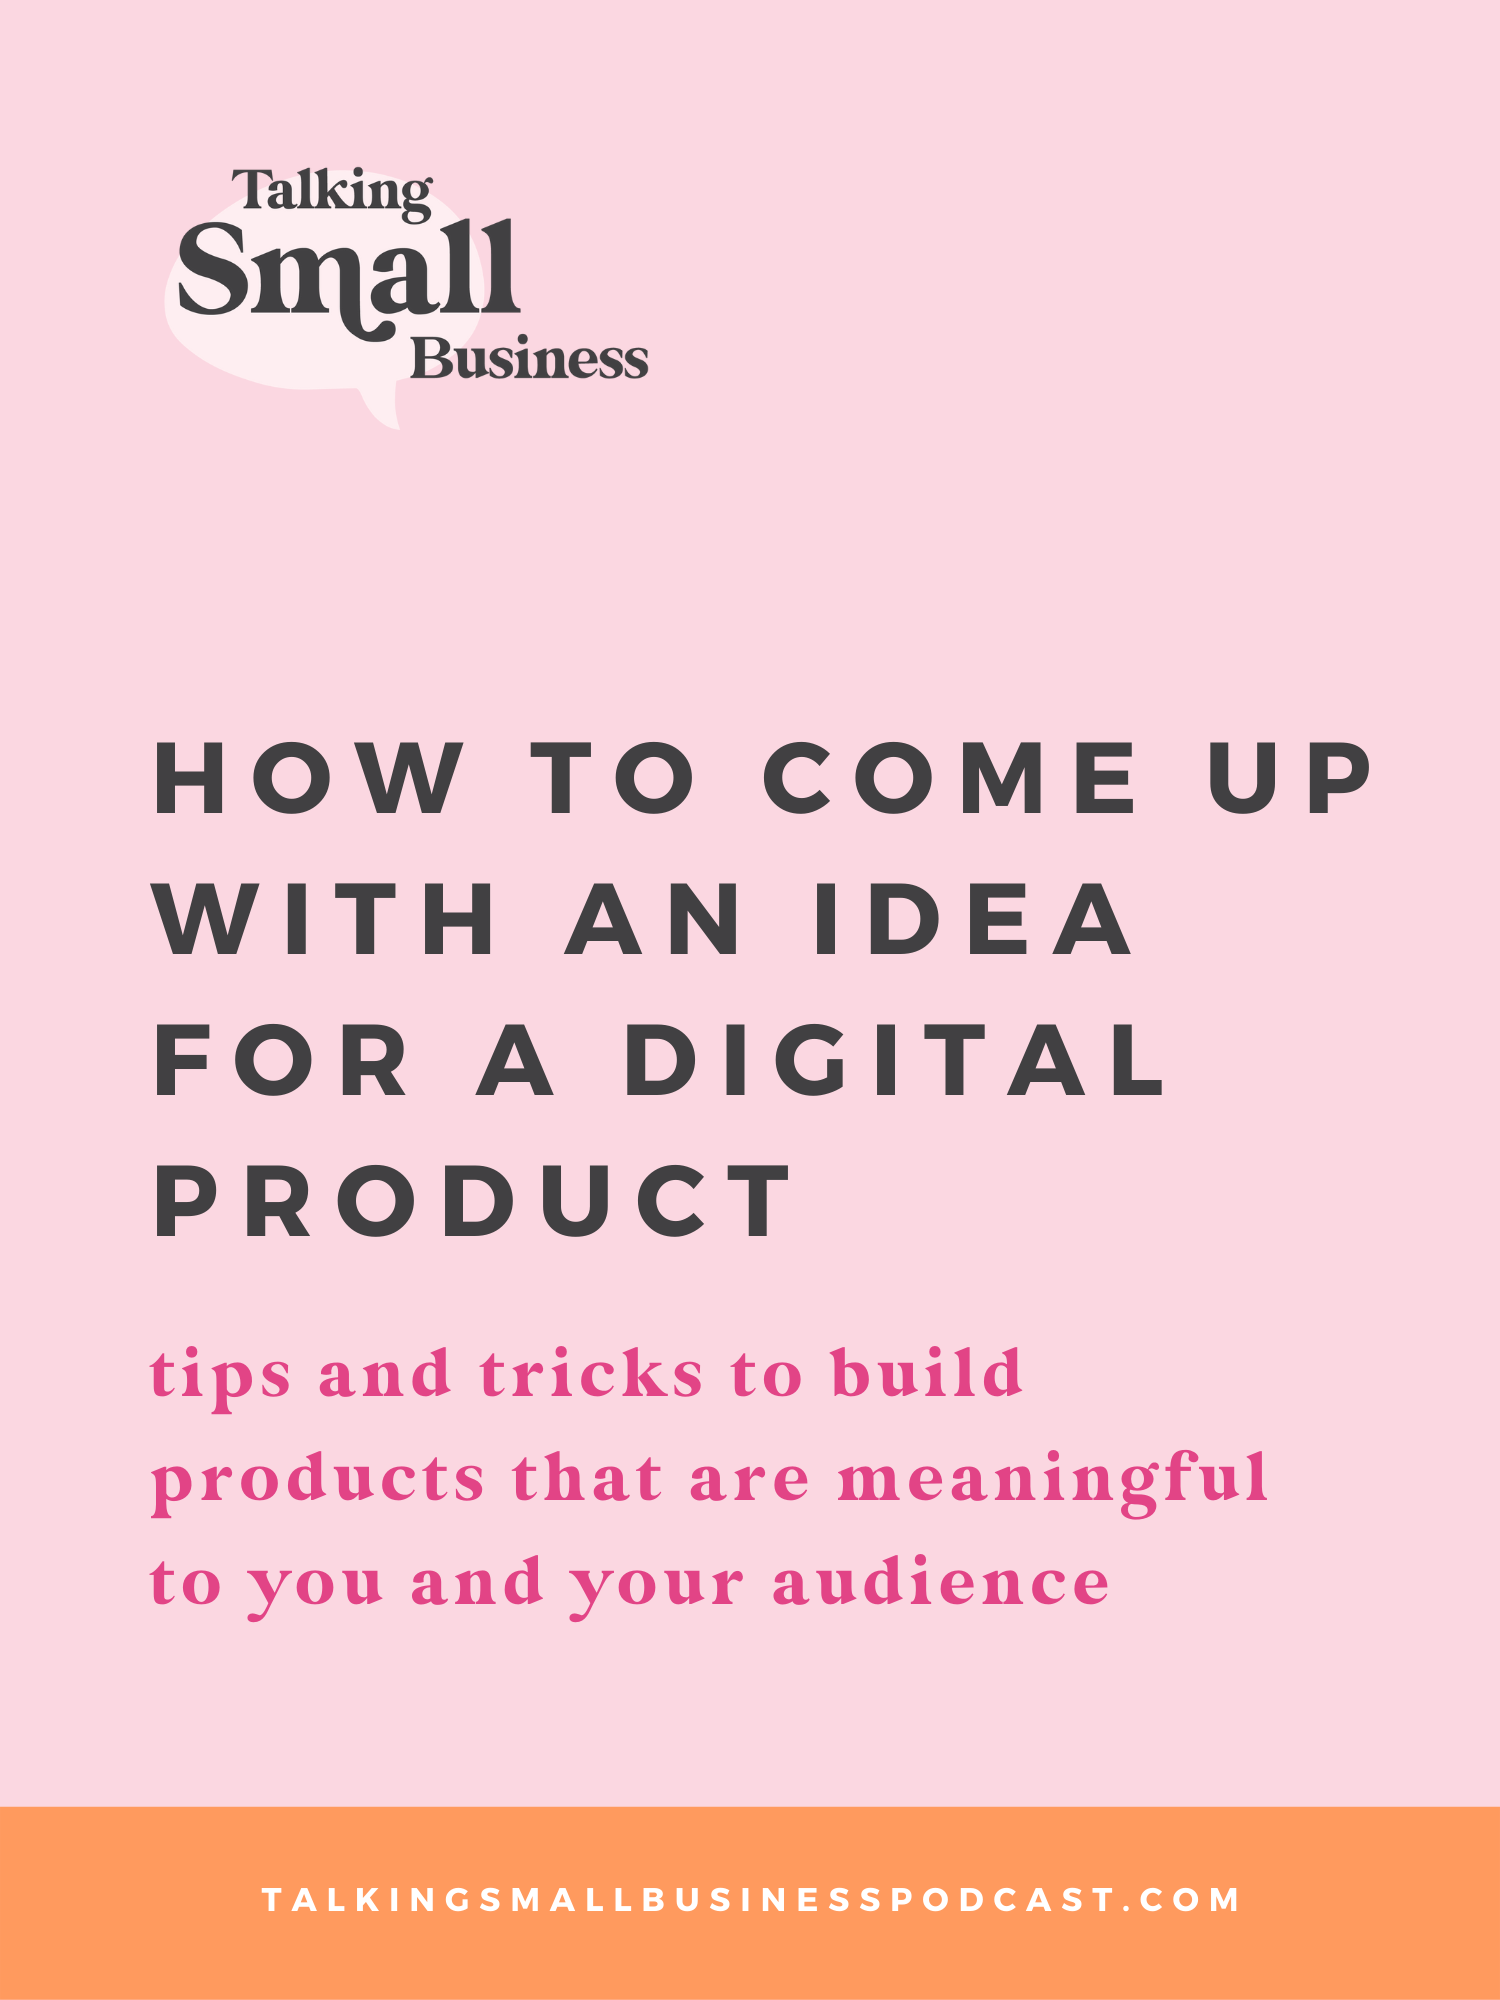 How to Come Up with An Idea for A Digital Product: tips from Megan Martin and Kat Schmoyer on Talking Small Business podcast